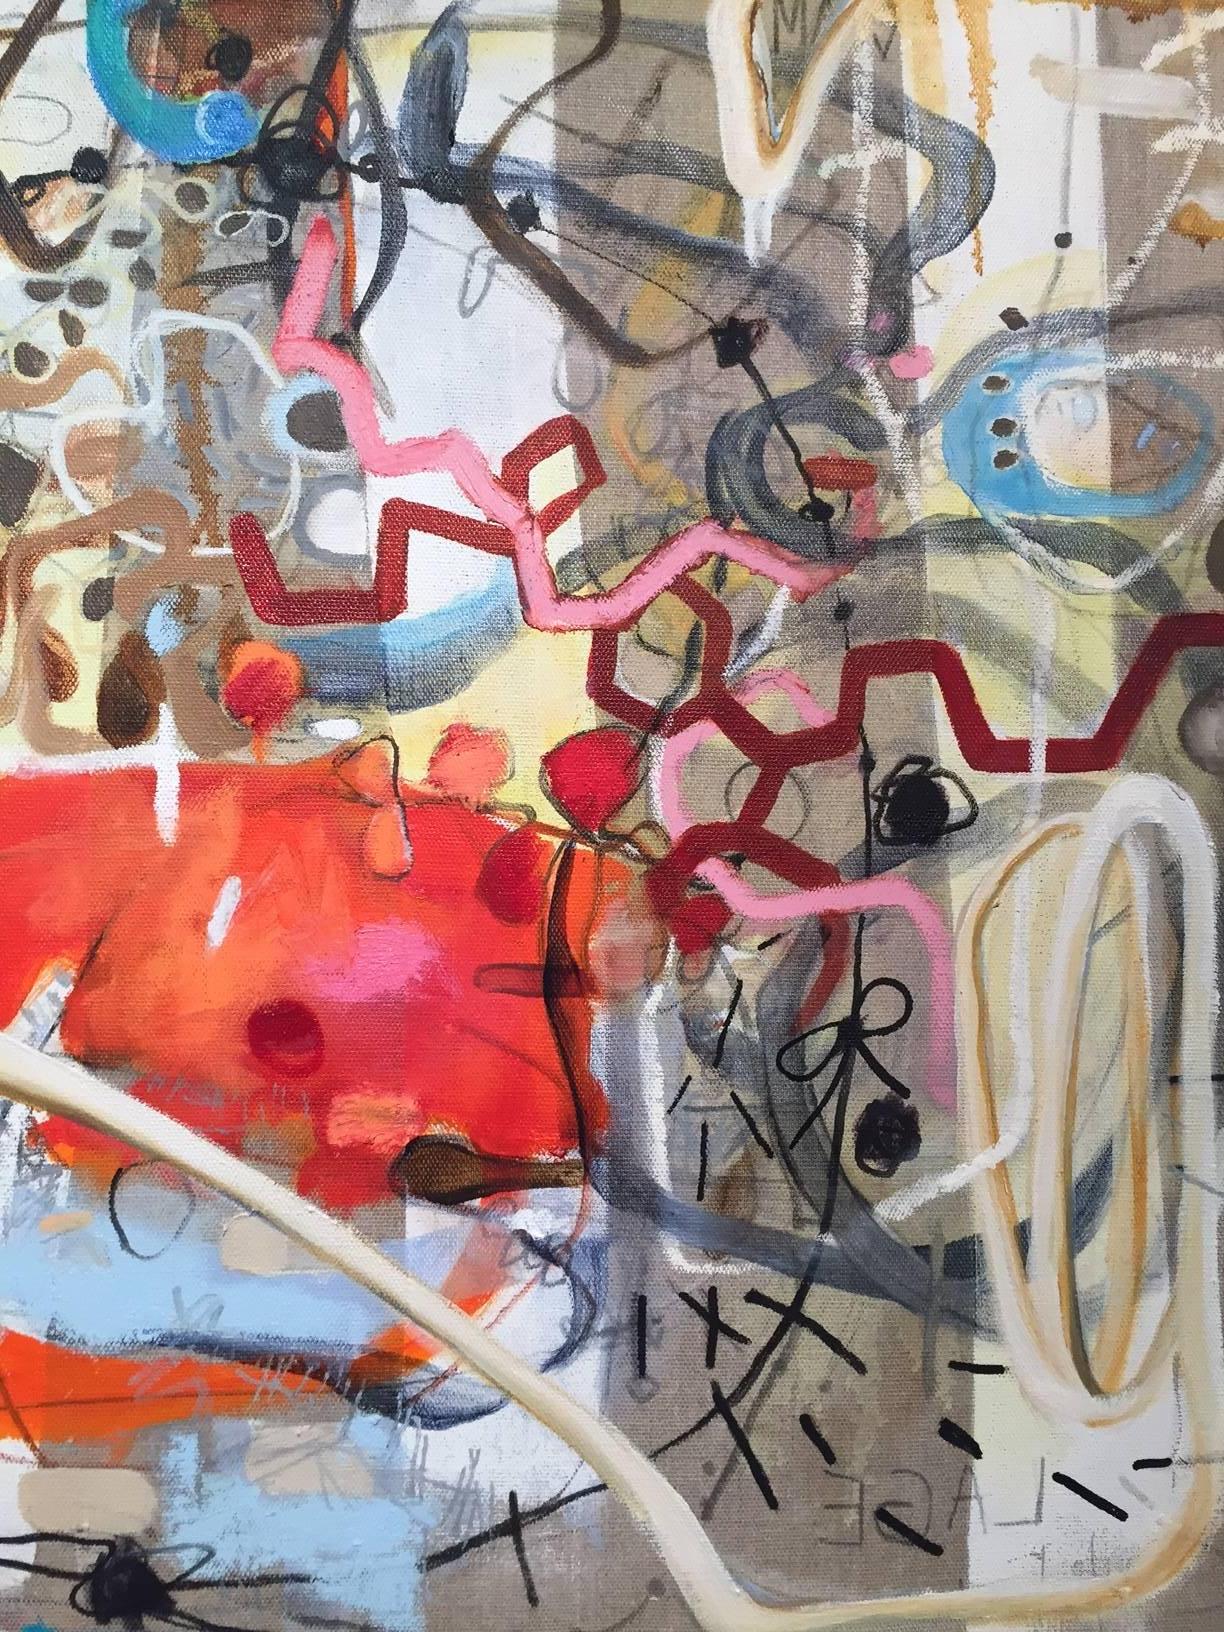 Trashed- What Makes a Good Man - Gray Abstract Painting by Janet Lage